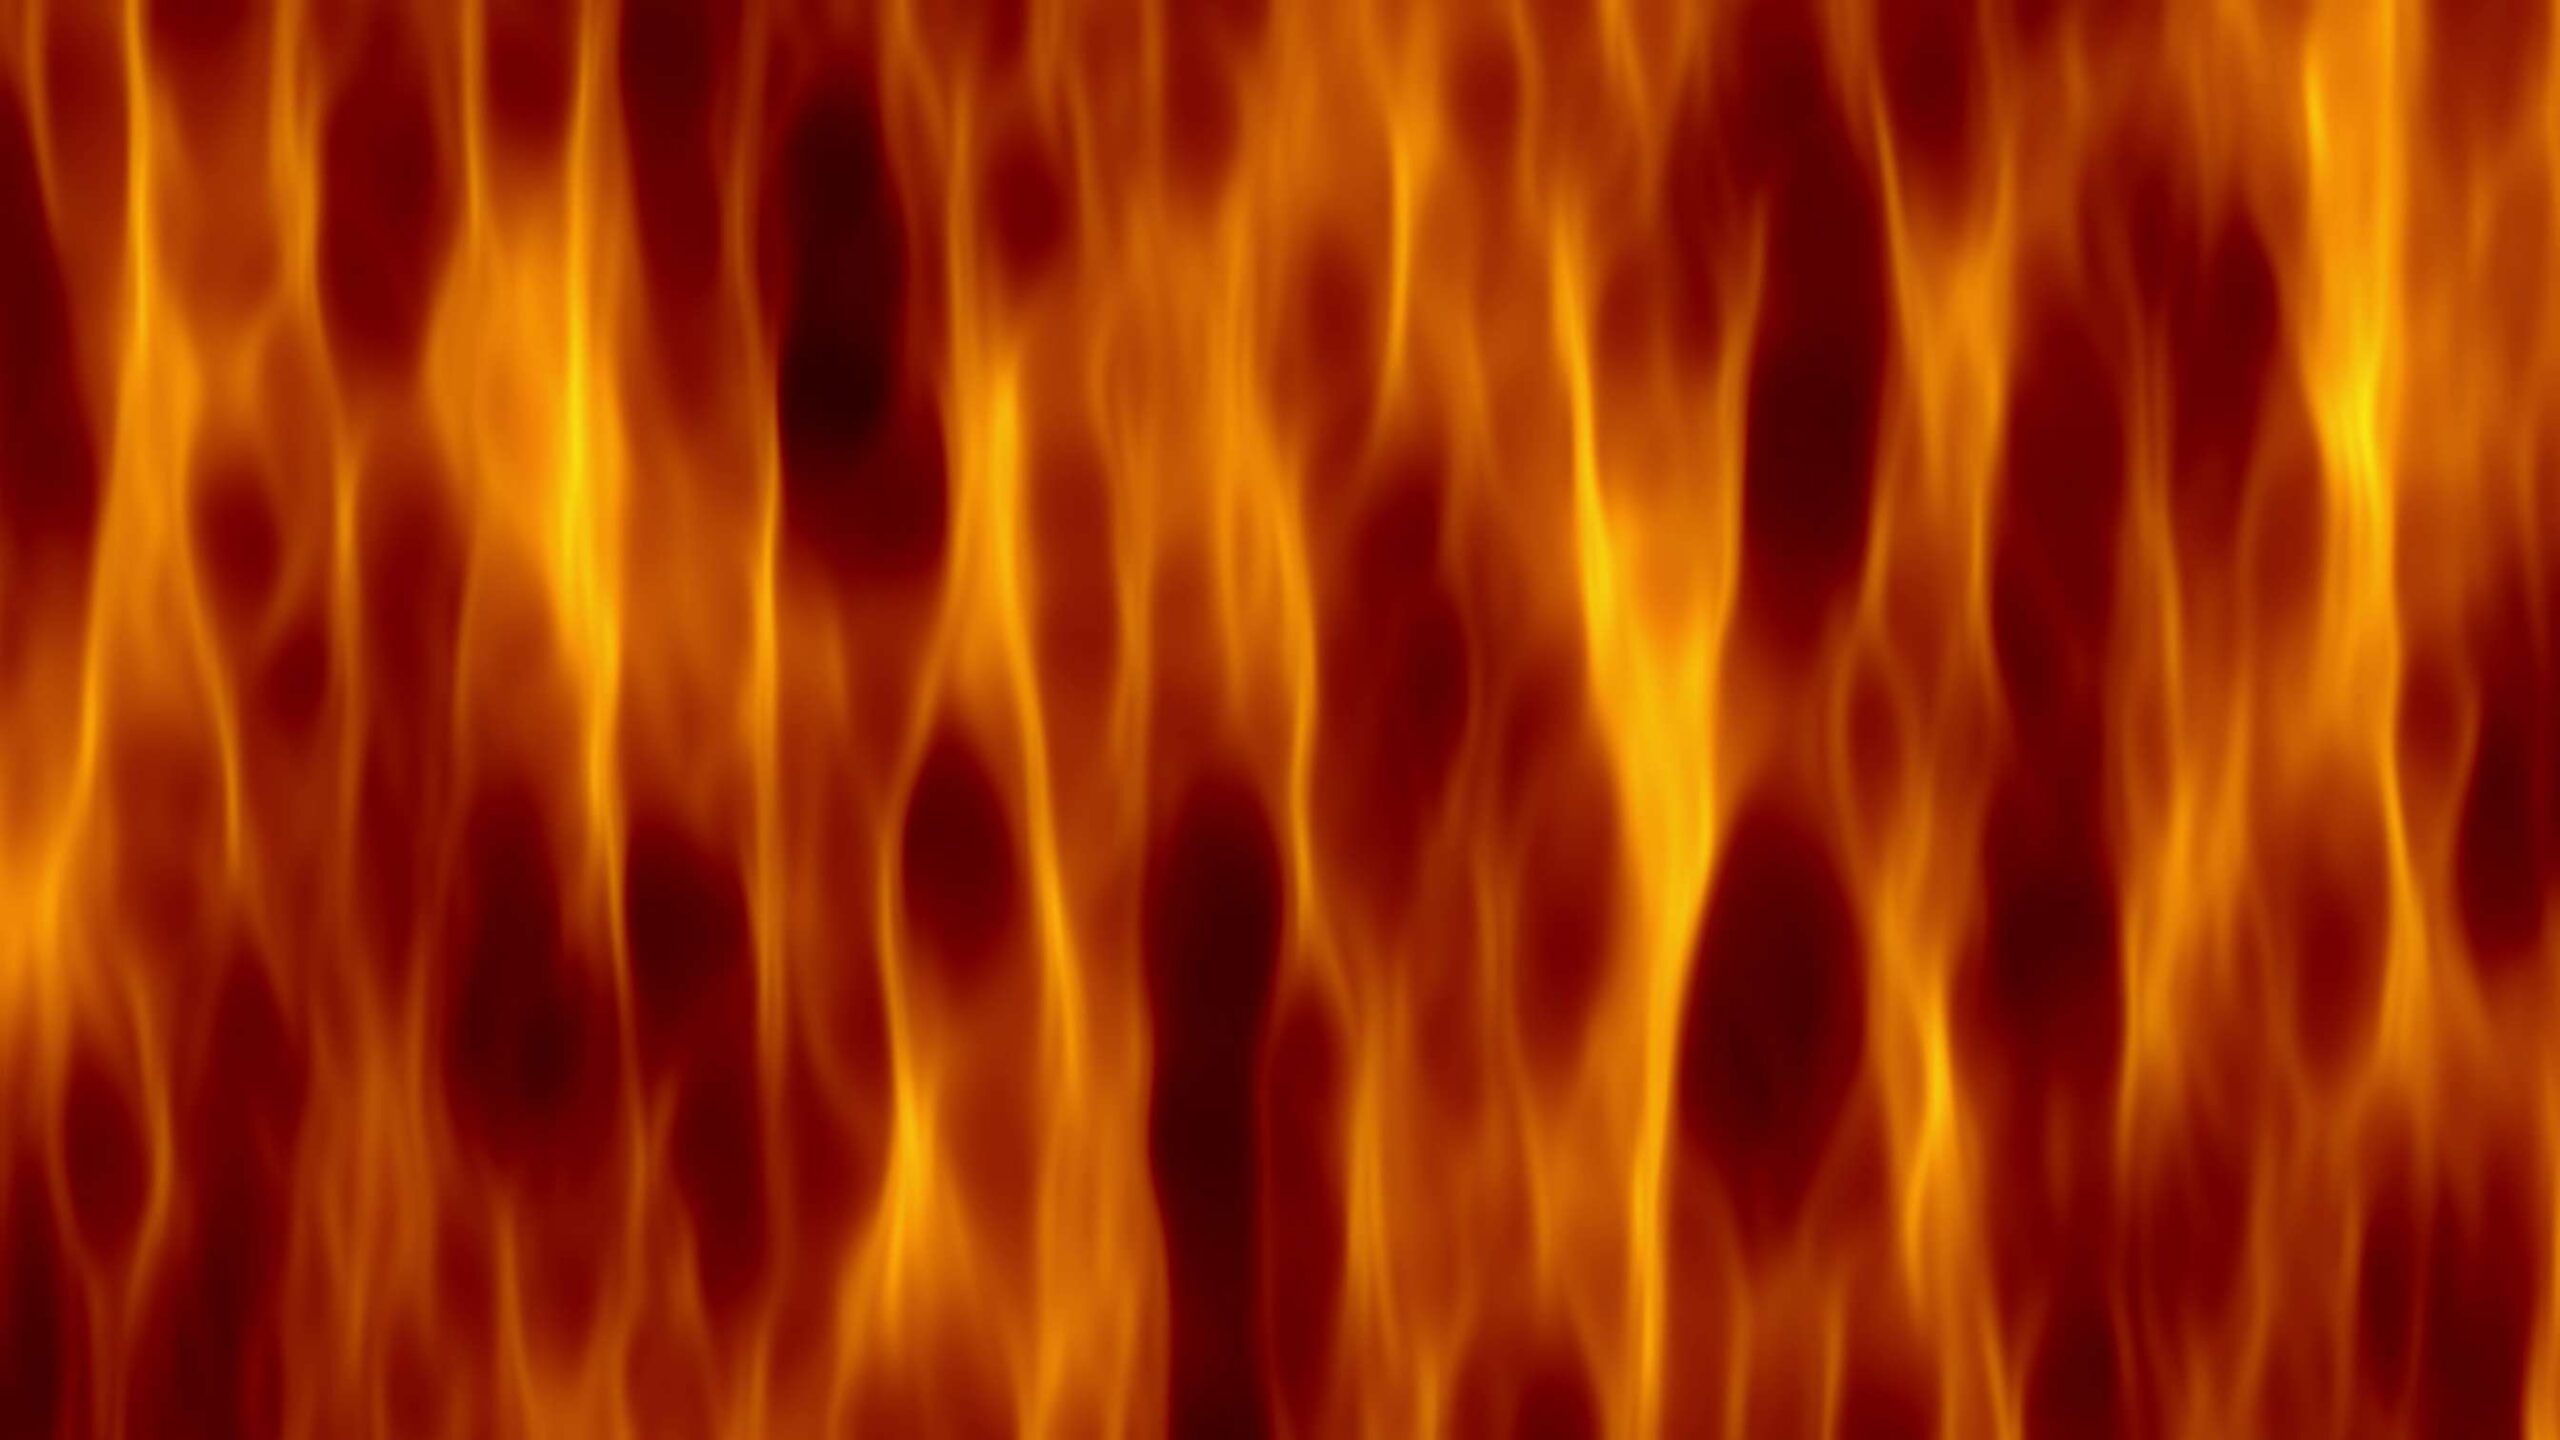 4K Fiery Screensaver || Free To Use UHD Motion Background || FREE DOWNLOAD